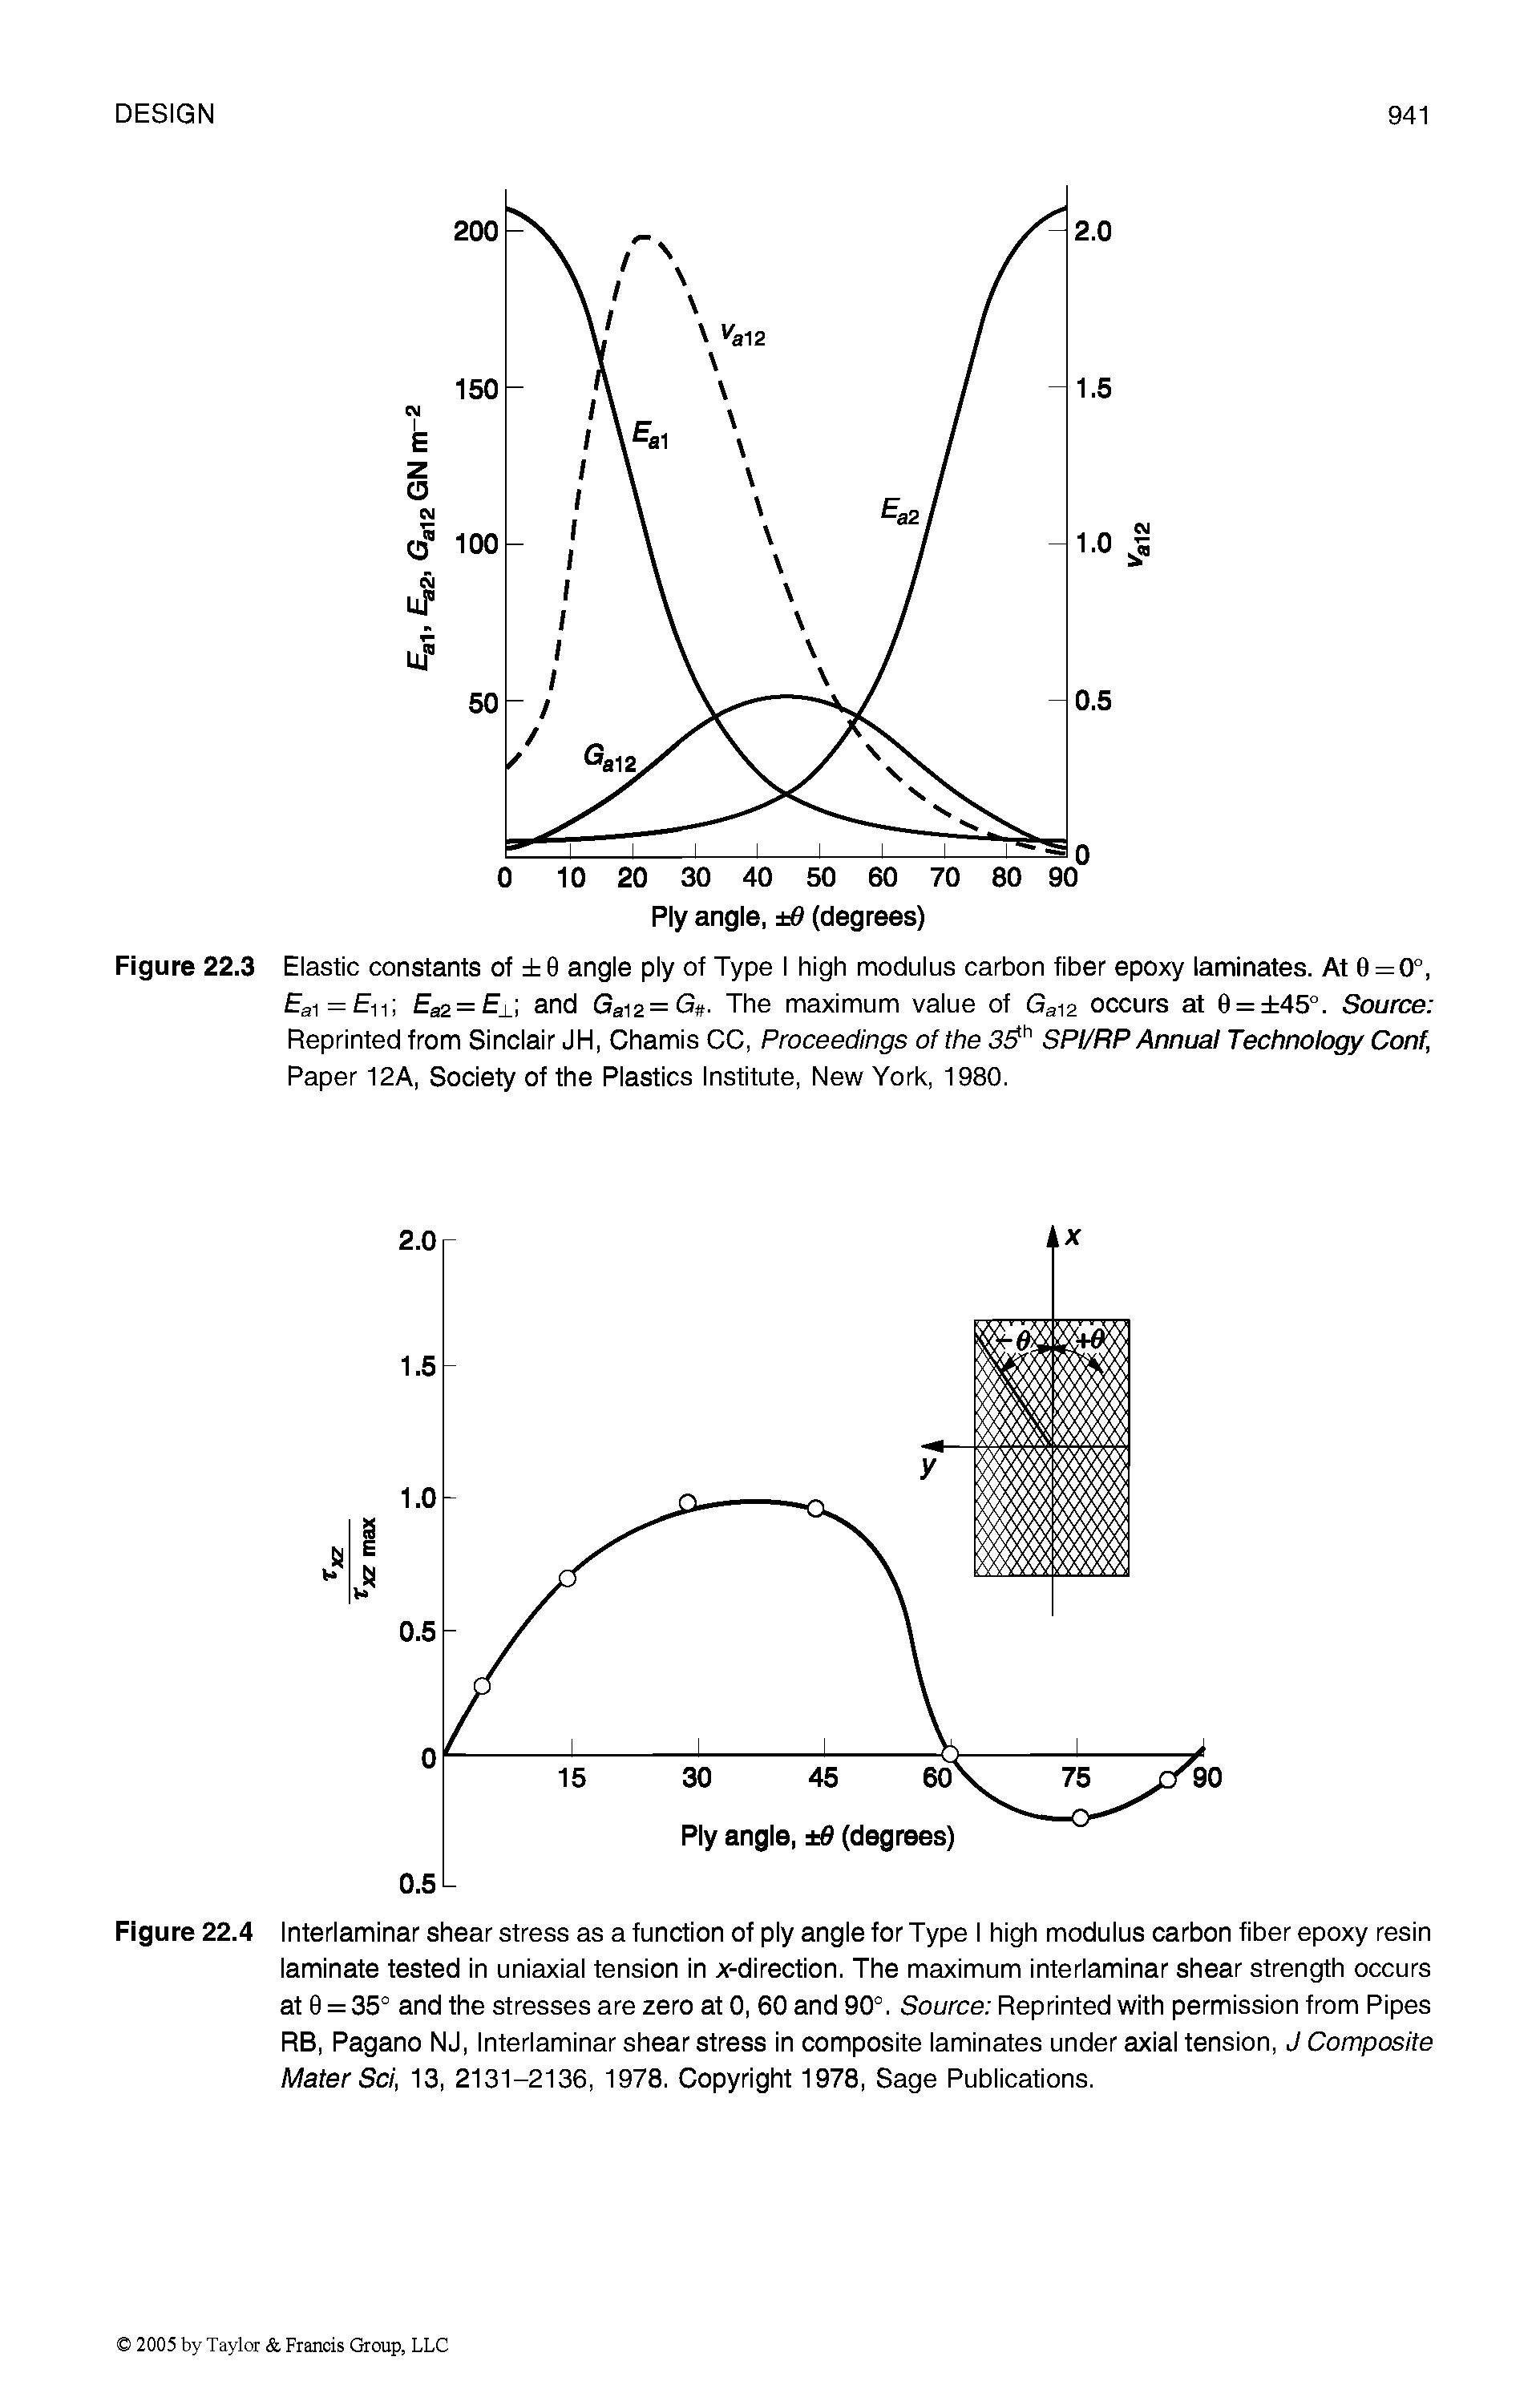 Figure 22.4 Interlaminar shear stress as a function of ply angle for Type I high modulus carbon fiber epoxy resin laminate tested in uniaxial tension in x-direction. The maximum interlaminar shear strength occurs at 0 = 35° and the stresses are zero at 0, 60 and 90°. Source Reprinted with permission from Pipes RB, Pagano NJ, Interlaminar shear stress in composite laminates under axial tension, J Composite Mater Sci, 13, 2131-2136, 1978. Copyright 1978, Sage Publications.